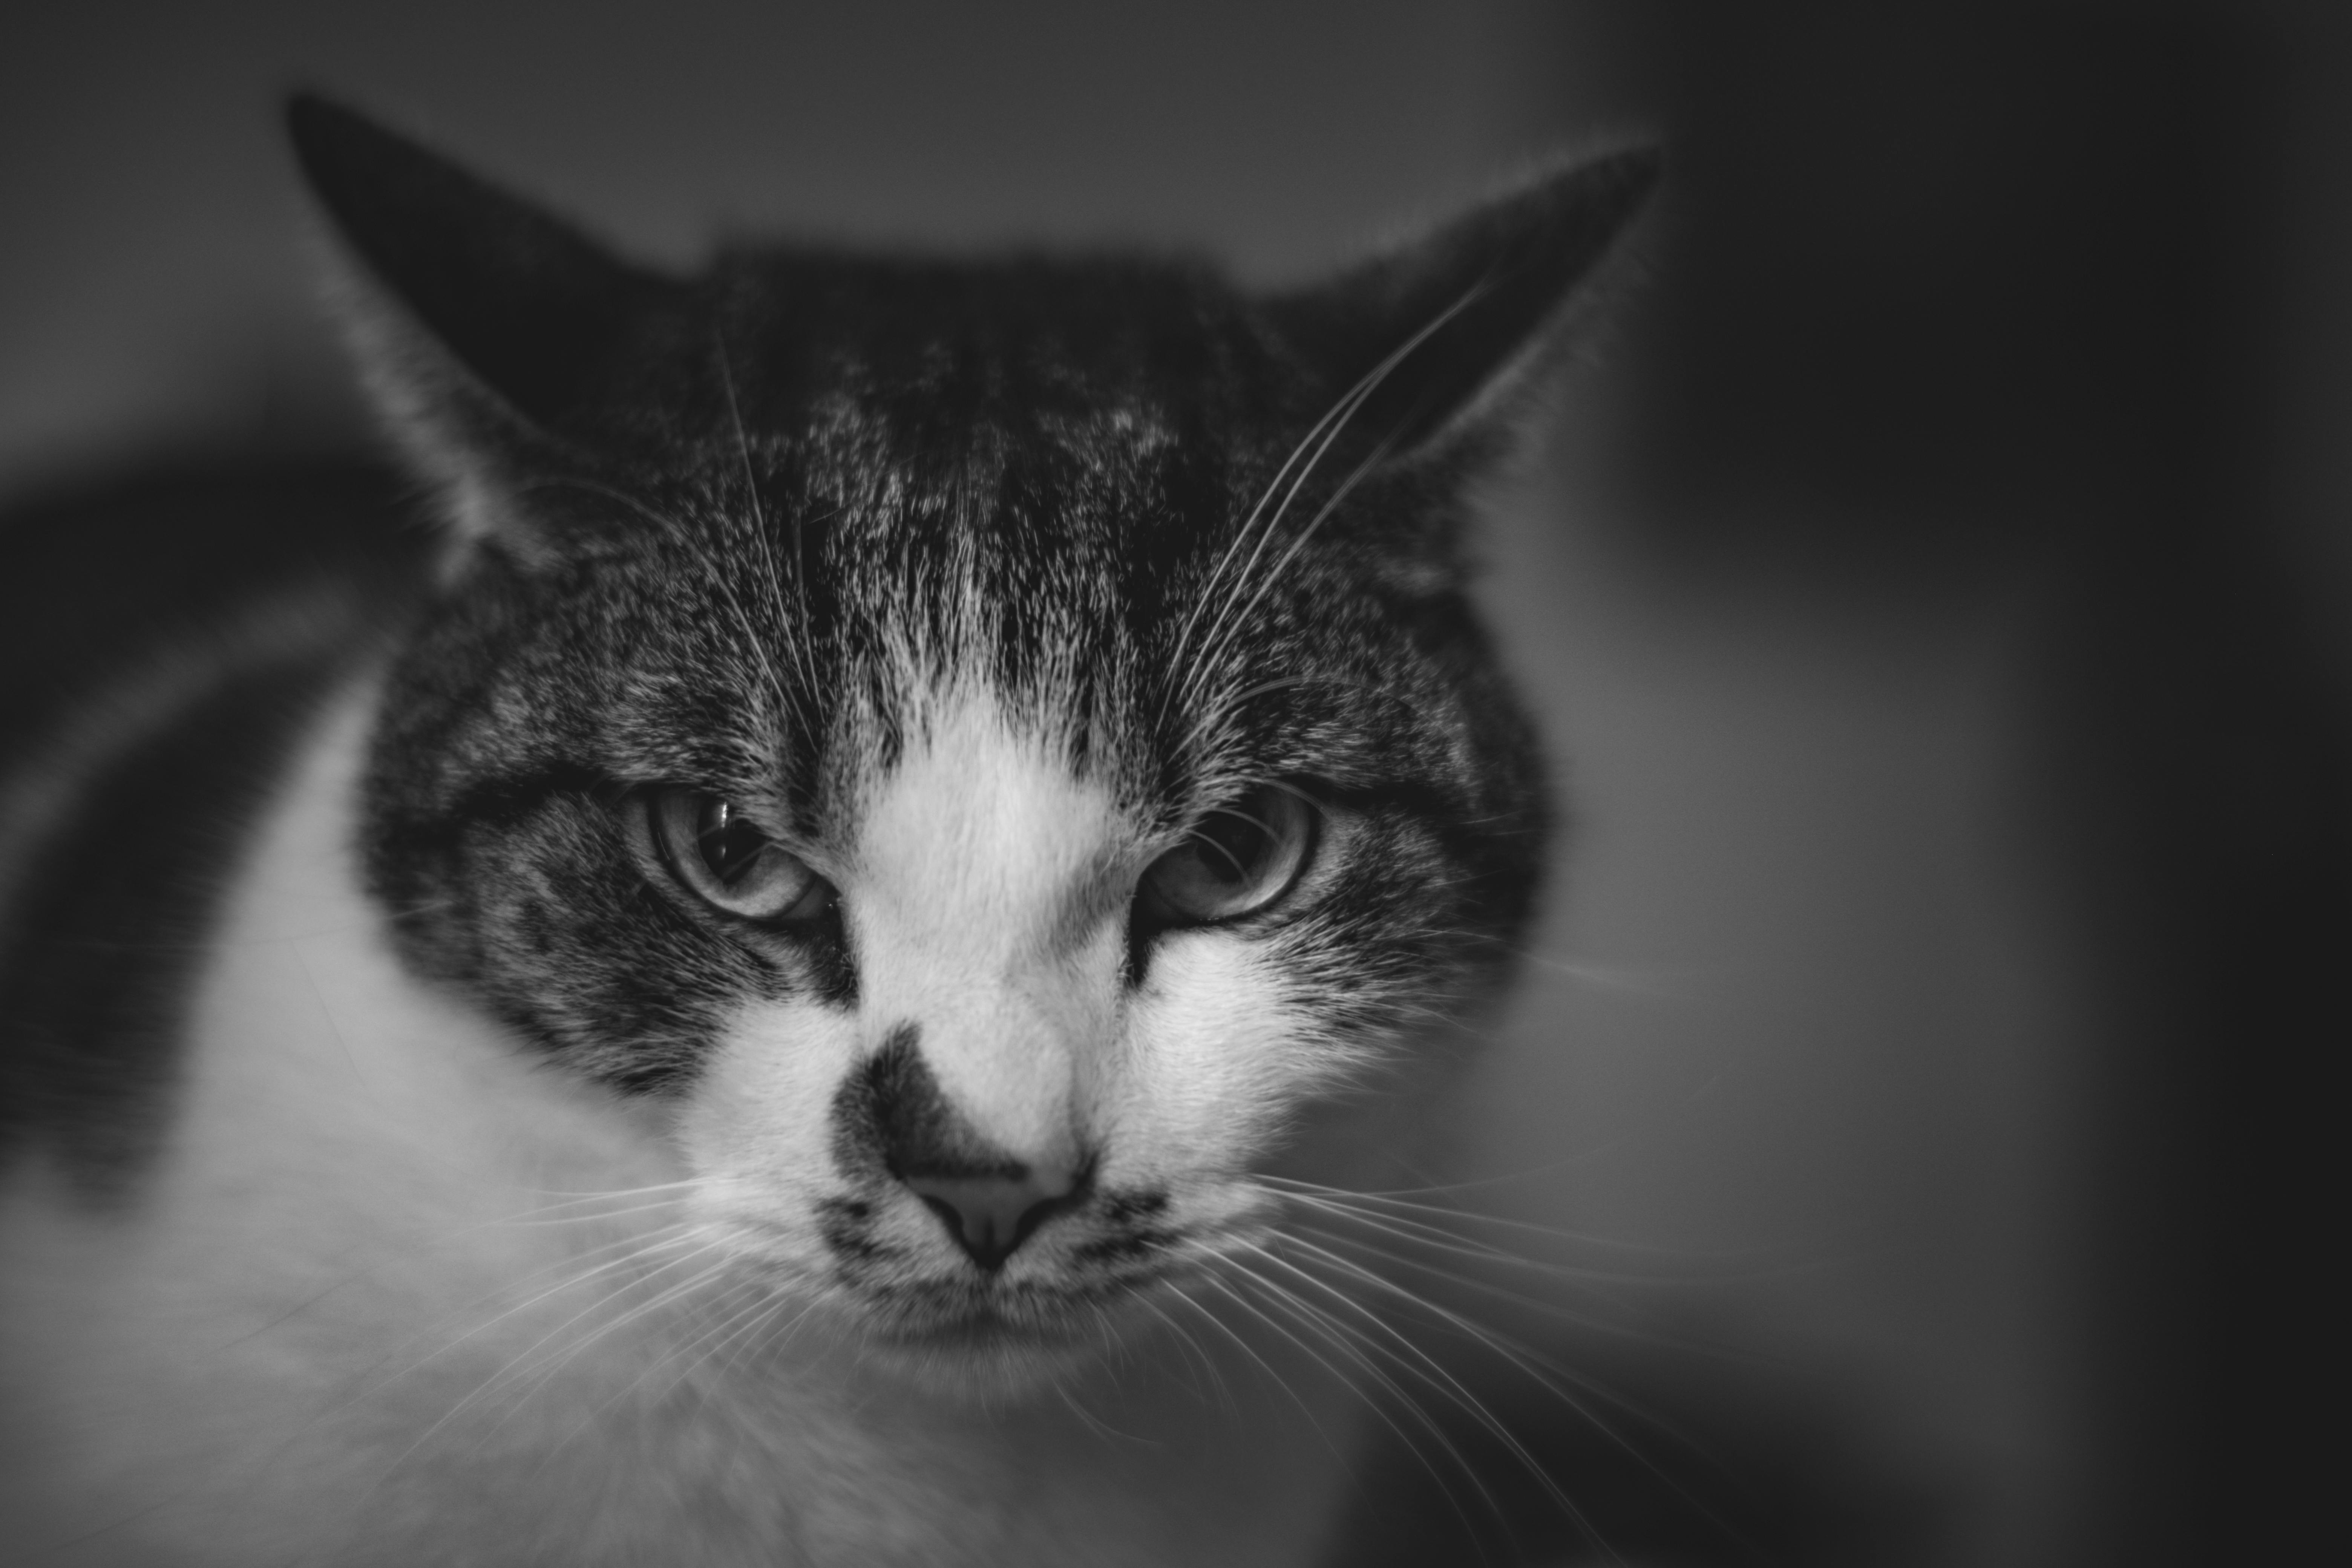 Cute Funny Cat Looking Suspiciously Or Angry On Black Background Stock  Photo - Download Image Now - iStock